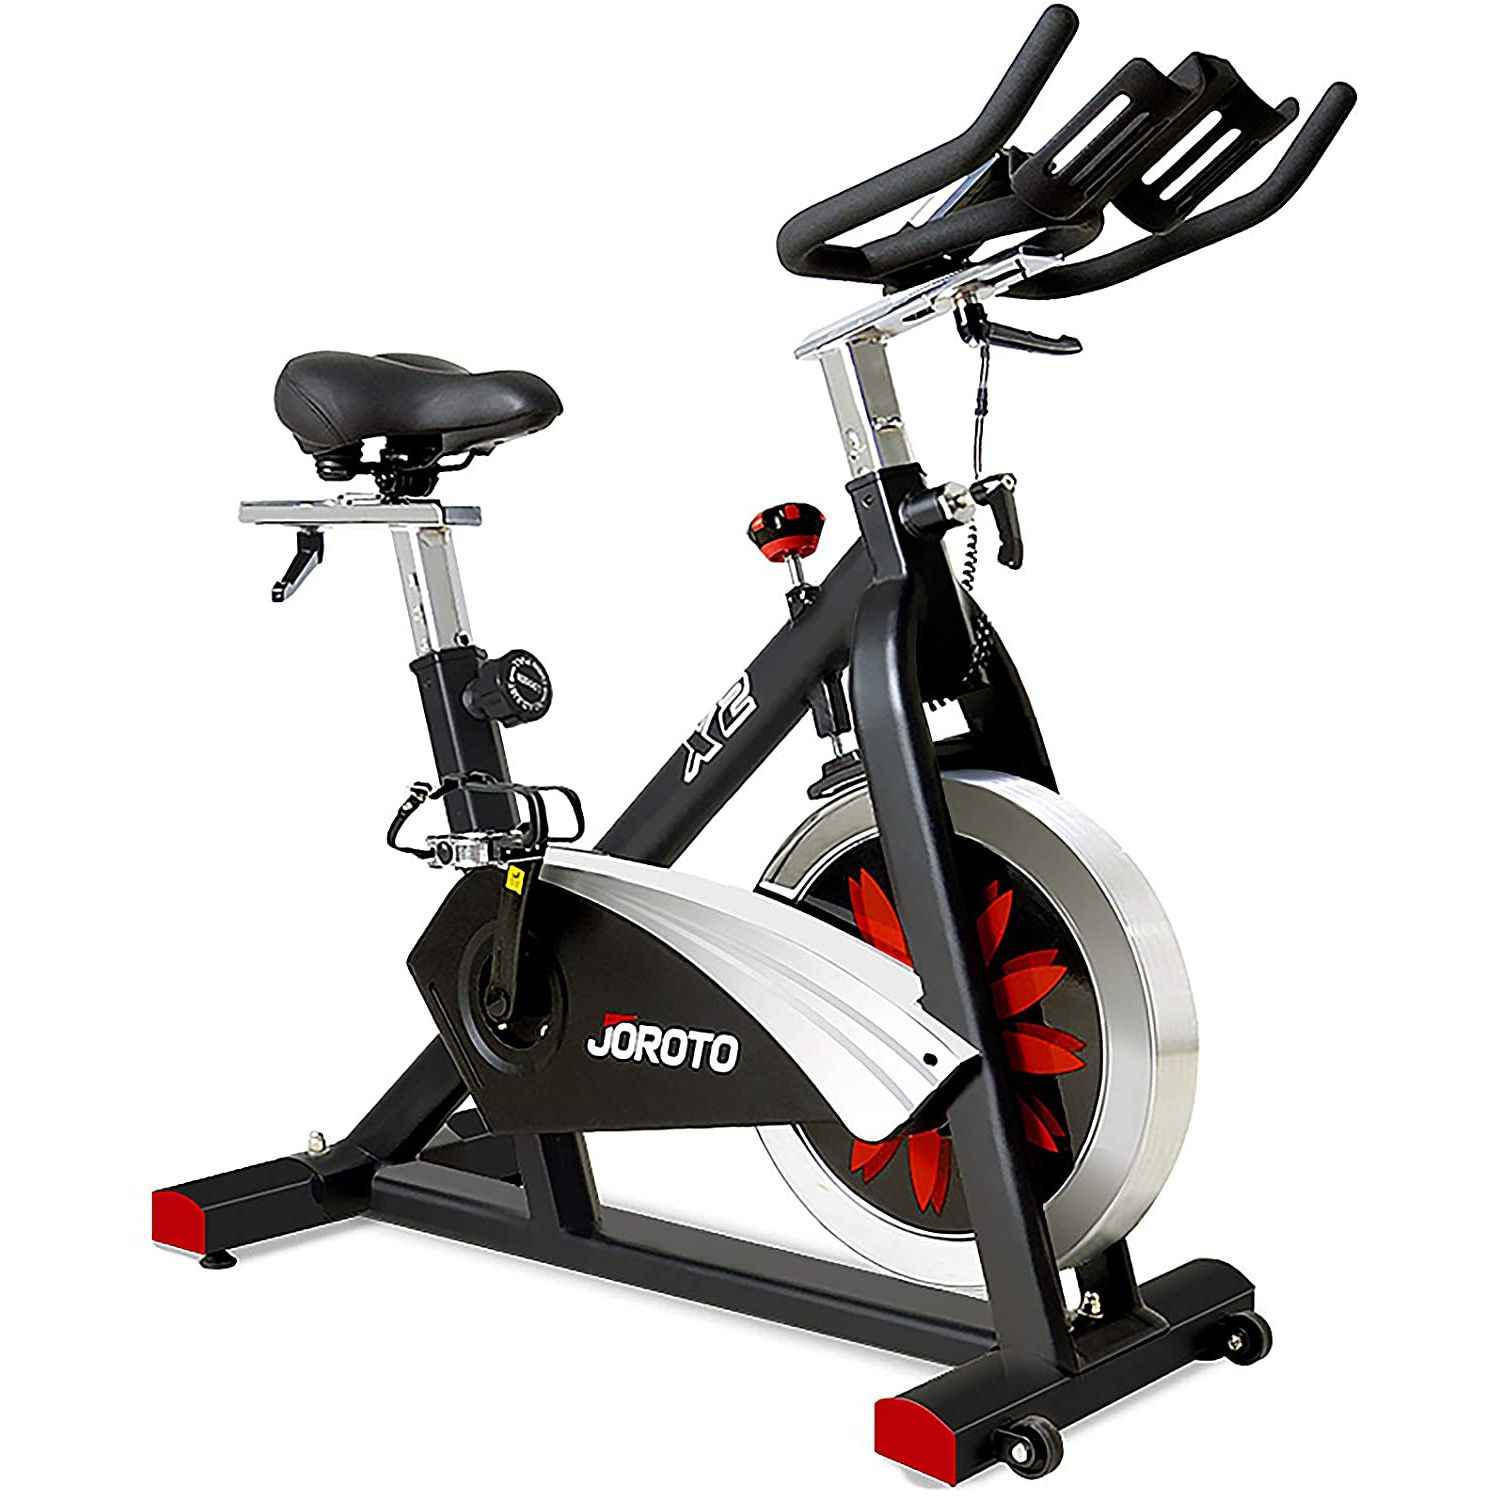 The NetDigz Editors rate the JOROTO X2 as the Optional Best Exercise Bike for the money.